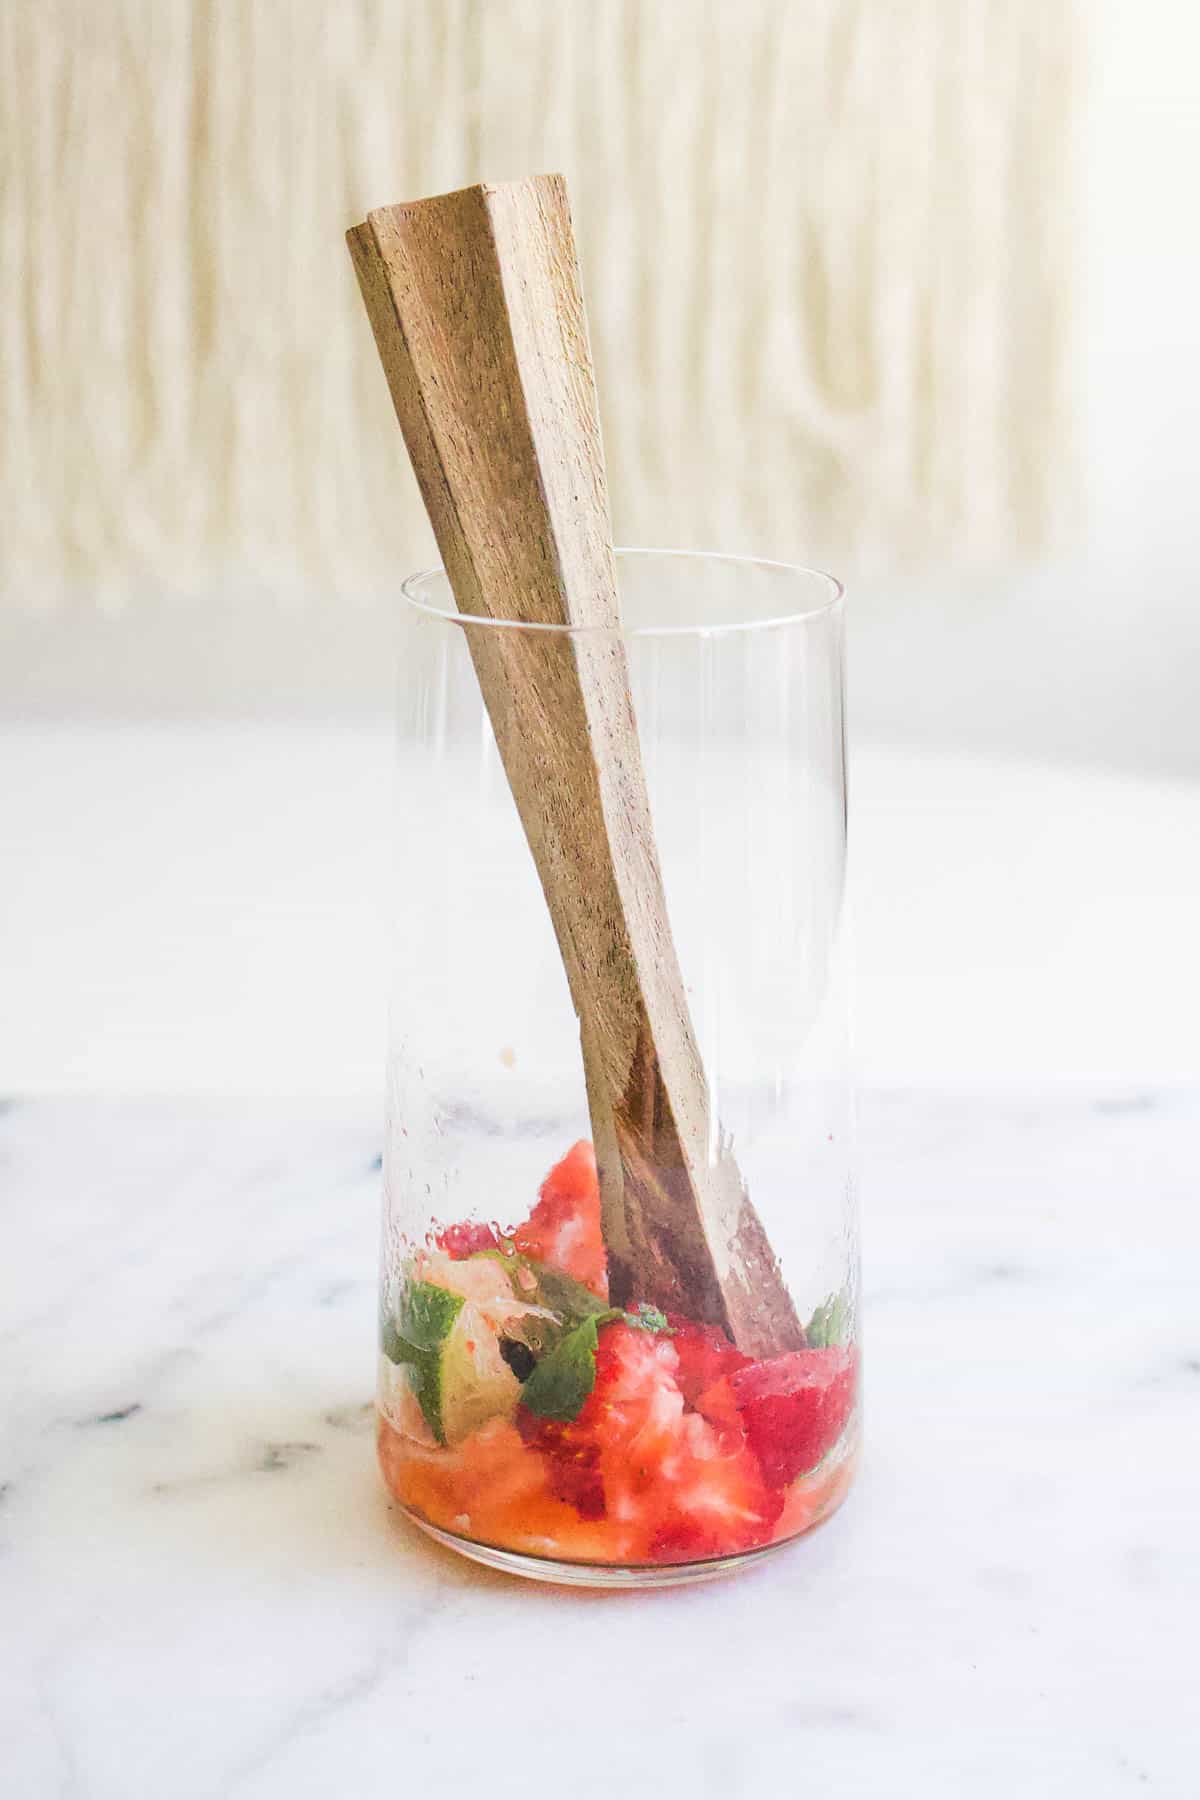 A muddler sticking out of a glass with strawberries mint and ginger muddled in the bottom.